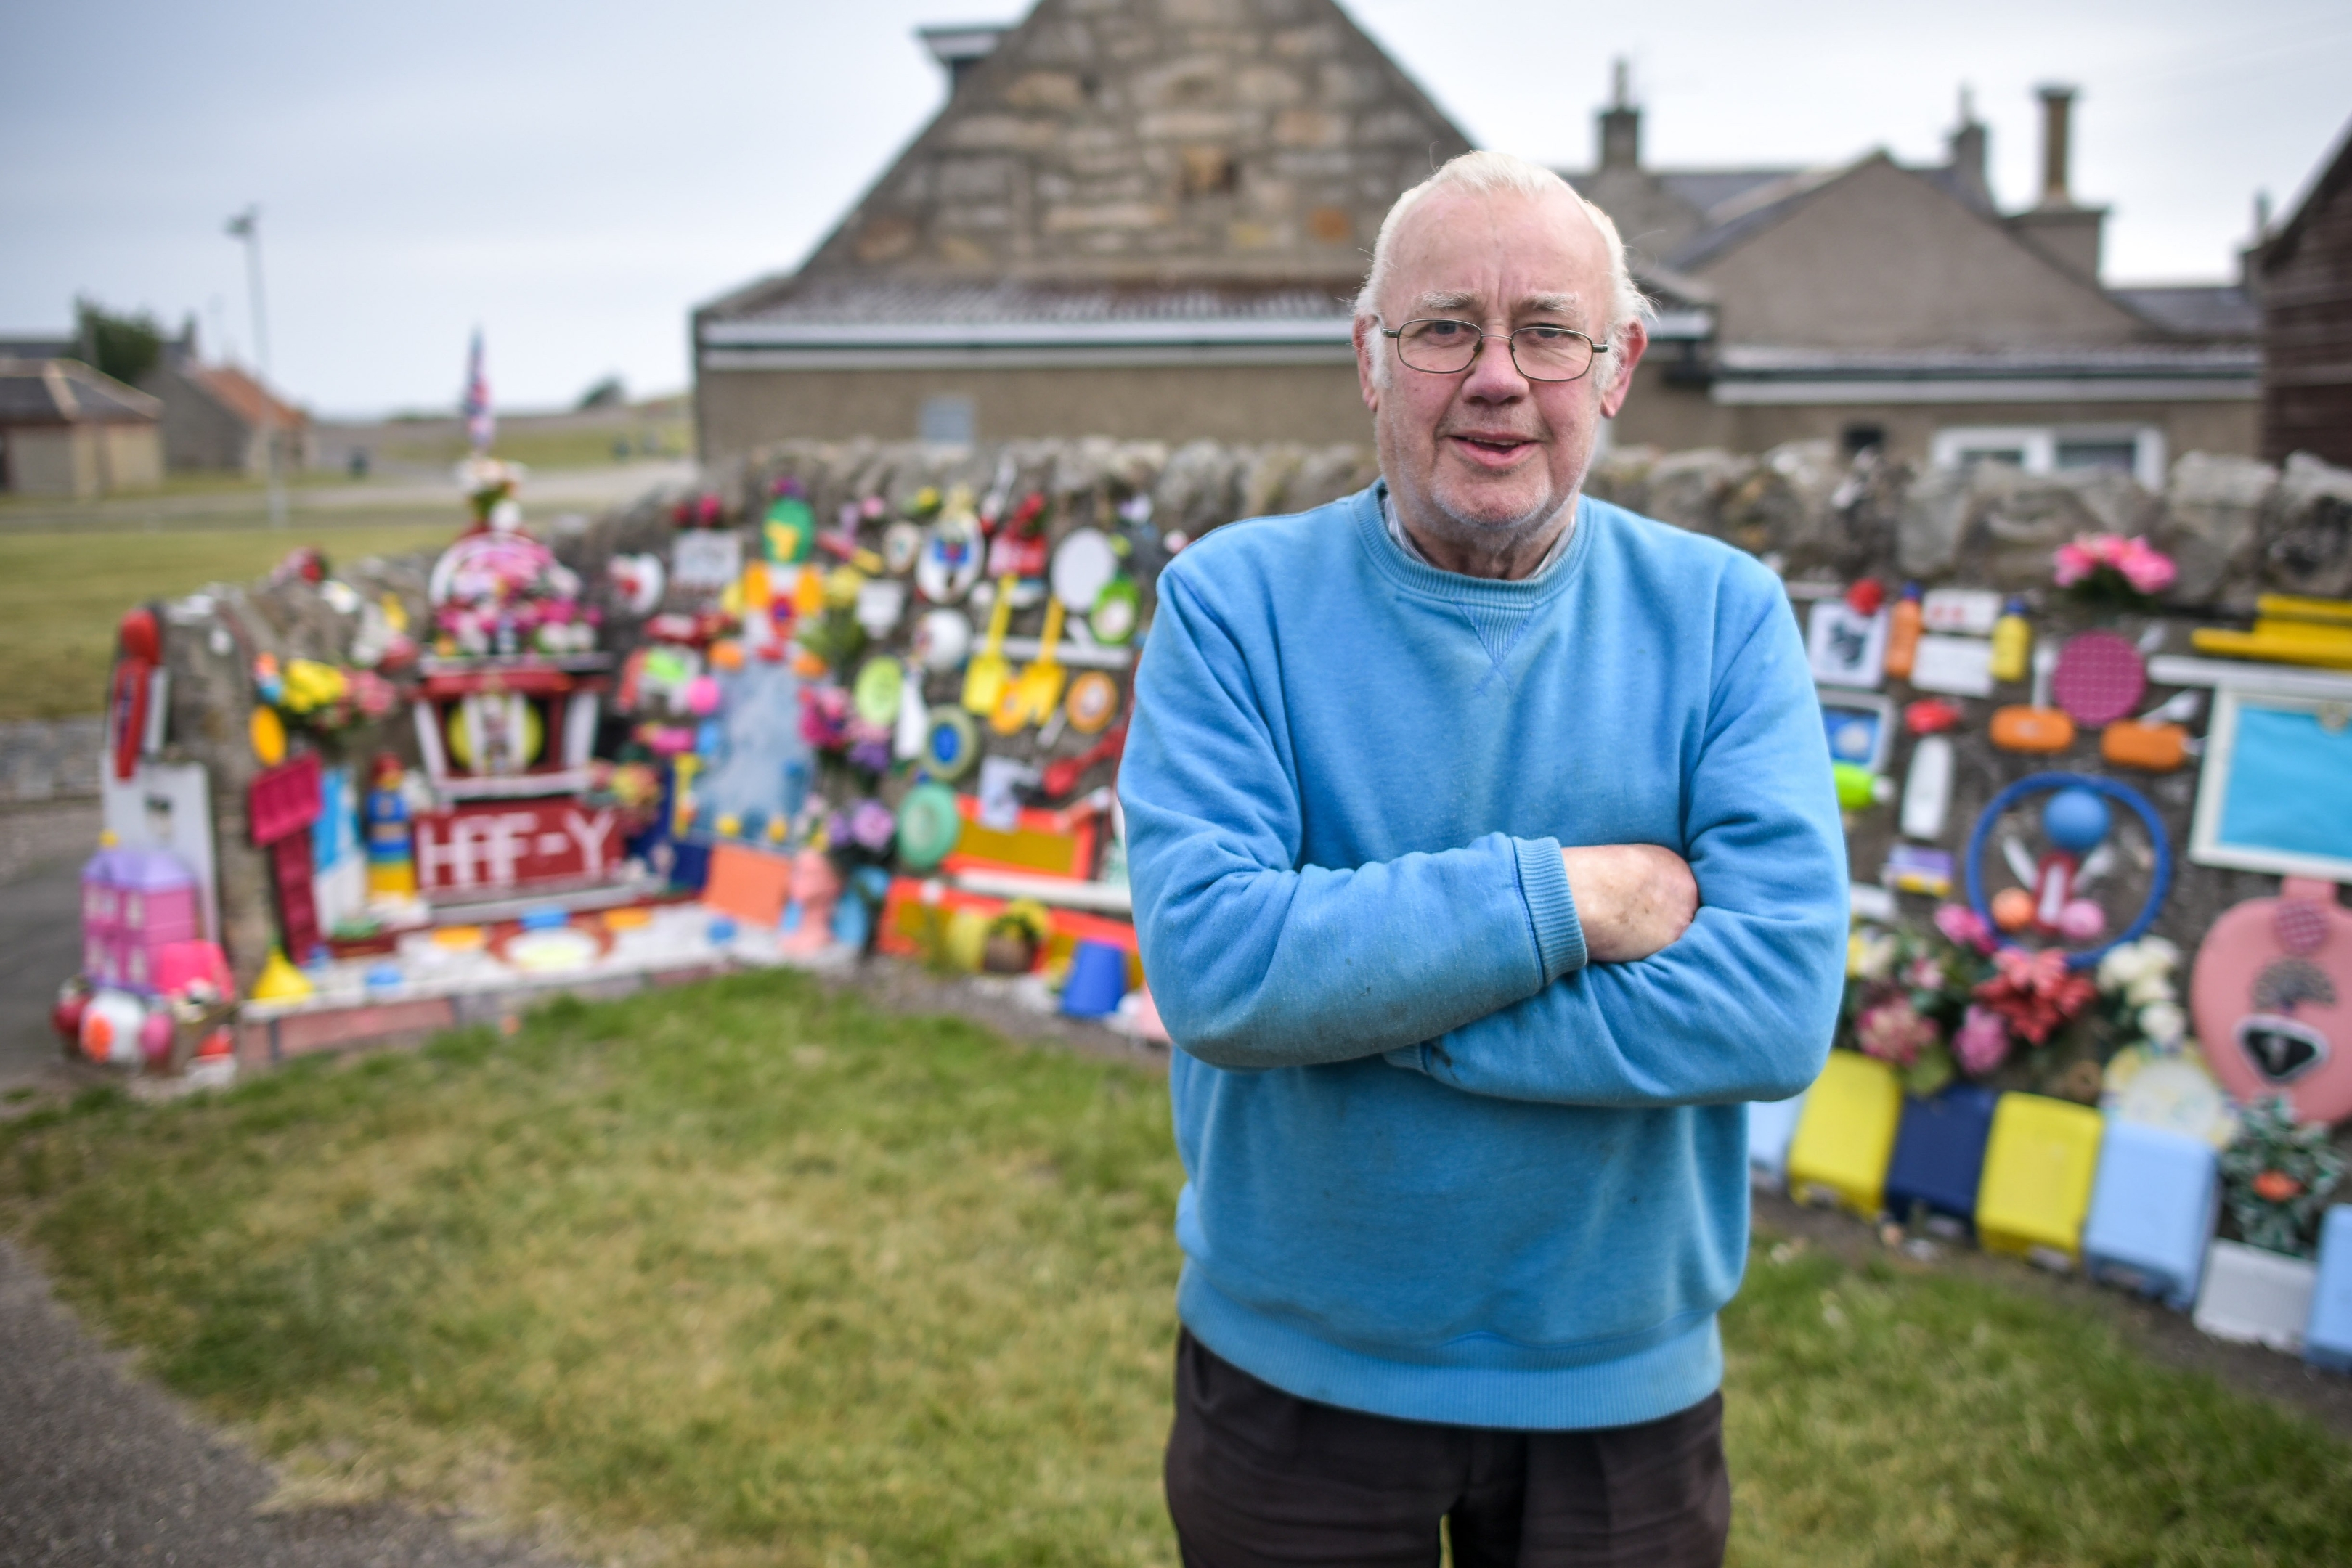 Charley Whyte, 76, with his mural on a wall in Lossiemouth, Moray on June 09 2016. Mr Whyte started the mural with just a chair in the corner as somewhere to sit during his evening walk. Since then he's added numerous other trinkets to the wall.  See Centre Press story CPLOO; A defiant retired plumber says he will not remove a bizarre mural he made from loo seats and toilet brushes. Charley Whyte, 76, started making the public artwork last August so that he could “brighten the place up”. And despite complaints from local residents, Charley said he won’t take down the mural in Lossiemouth, Moray. The mural, covered in random objects such as toilet brushes, loo seats and even Frisbees, stands at the entrance to Charley’s street. It is one of the first things drivers will see as they make their way into the town.